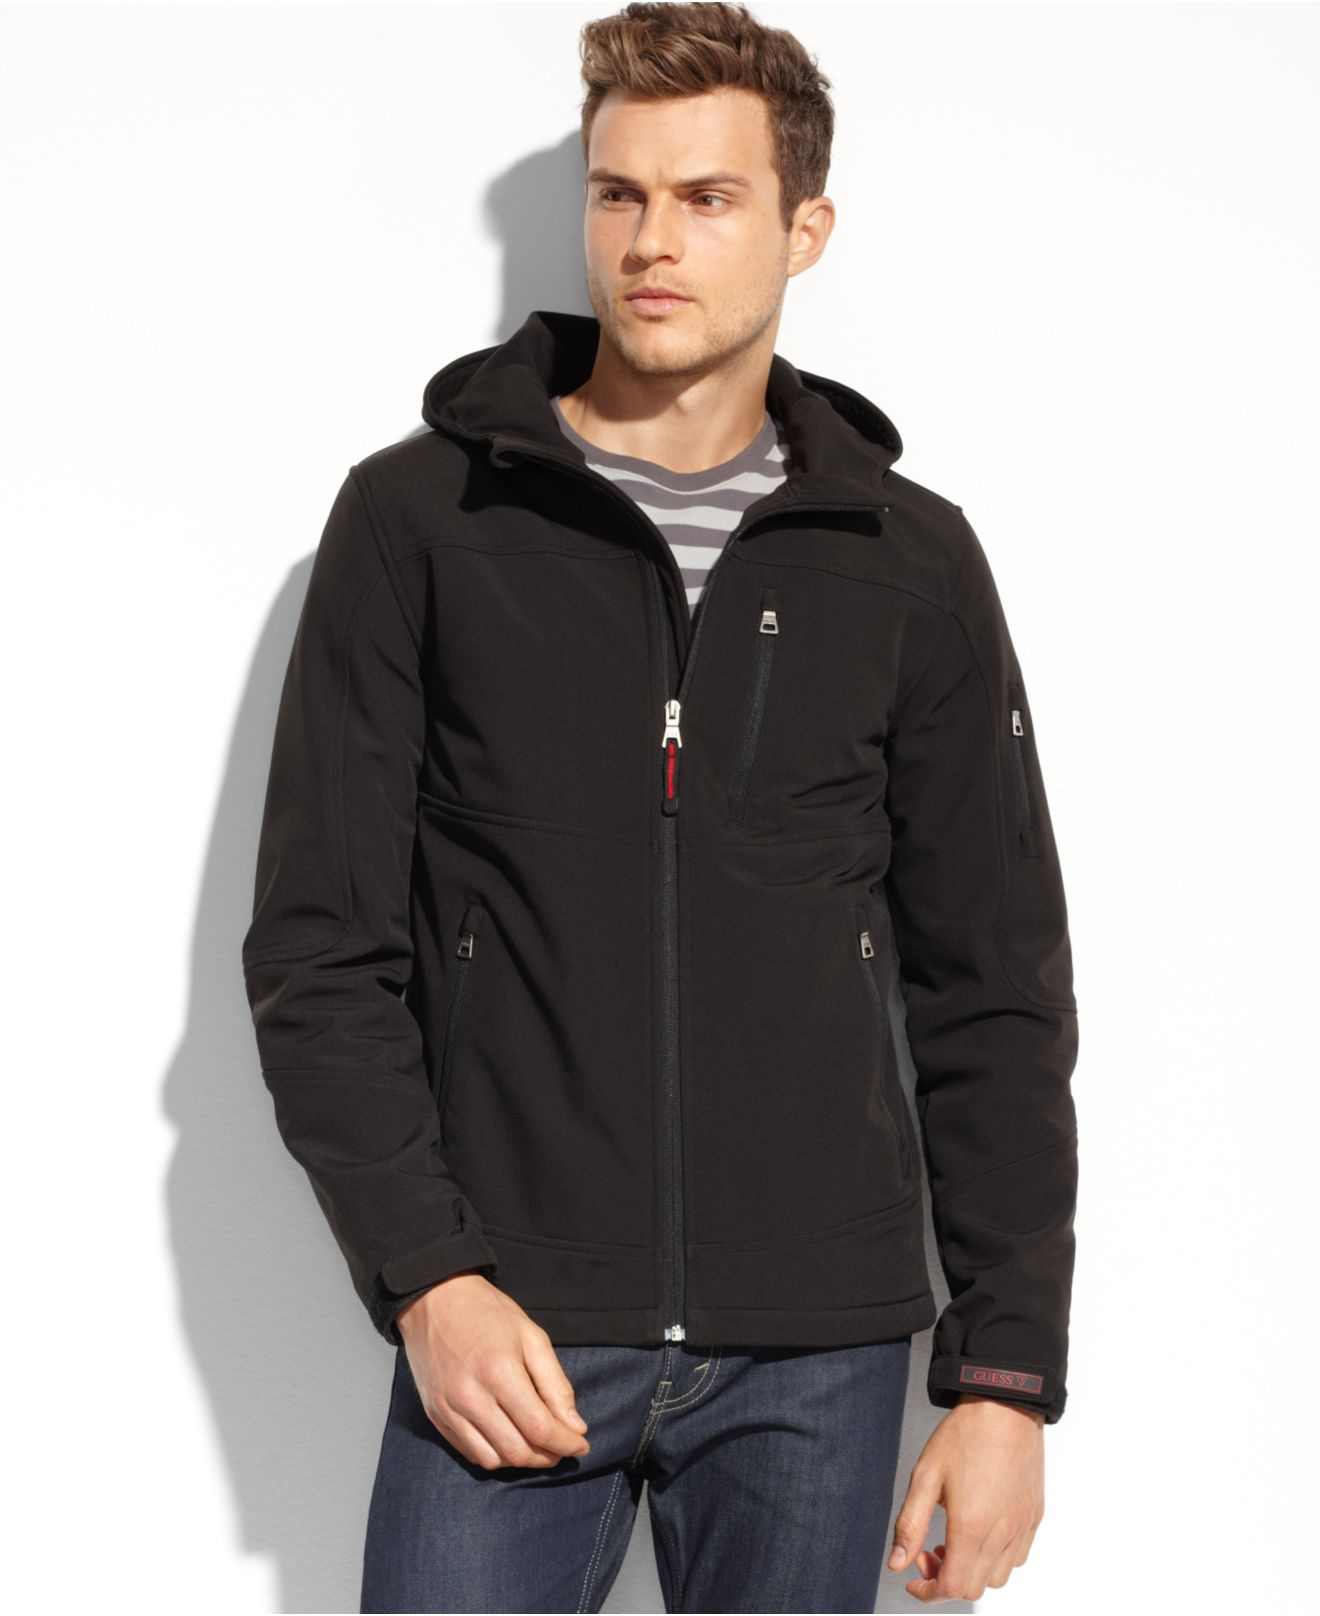 Guess Hooded Soft-Shell Active Performance Jacket in Black for Men - Lyst